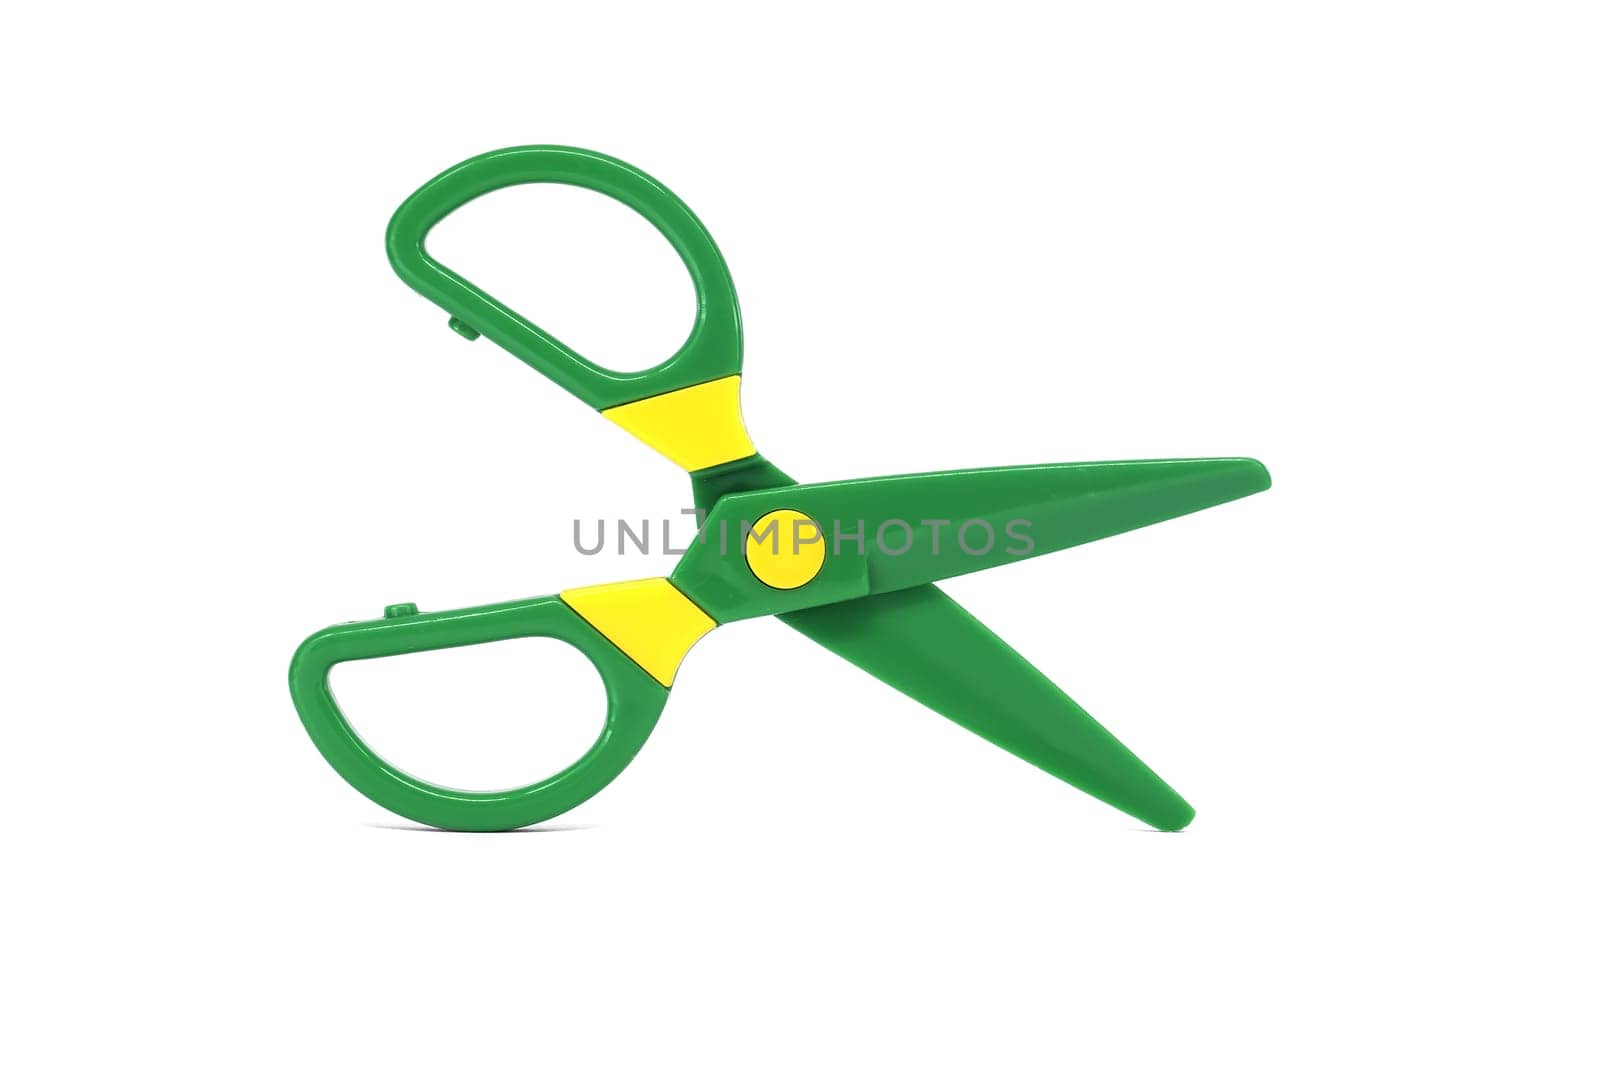 Safety plastic scissors for paper cut art craft isolated on white background